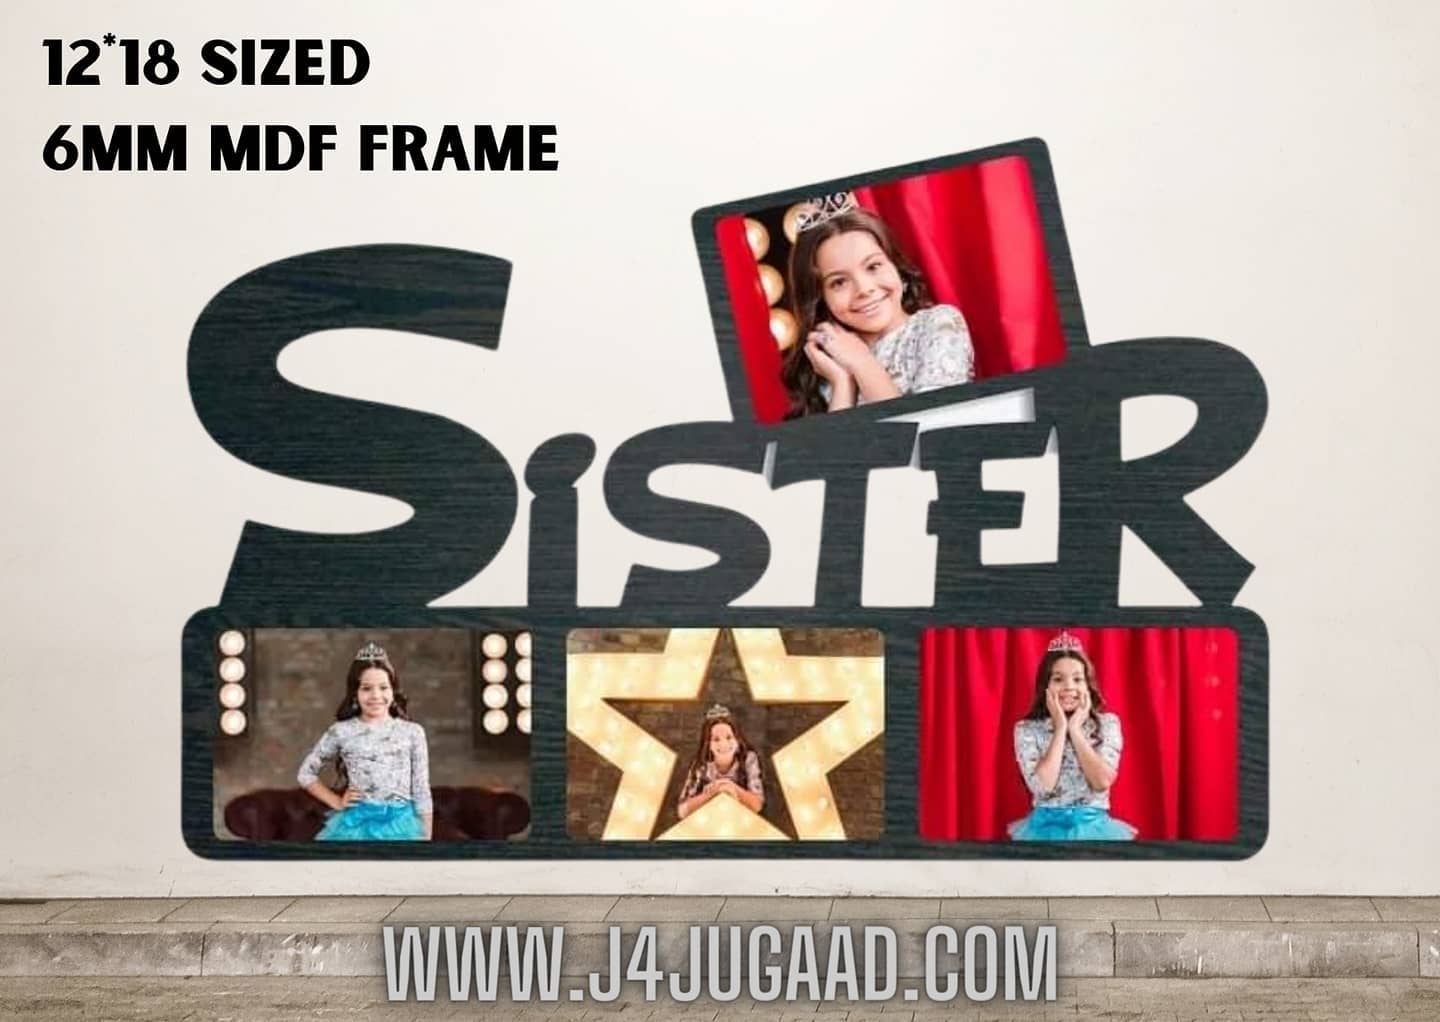 Sister theme Mdf 12*18 inch wall hanging frame